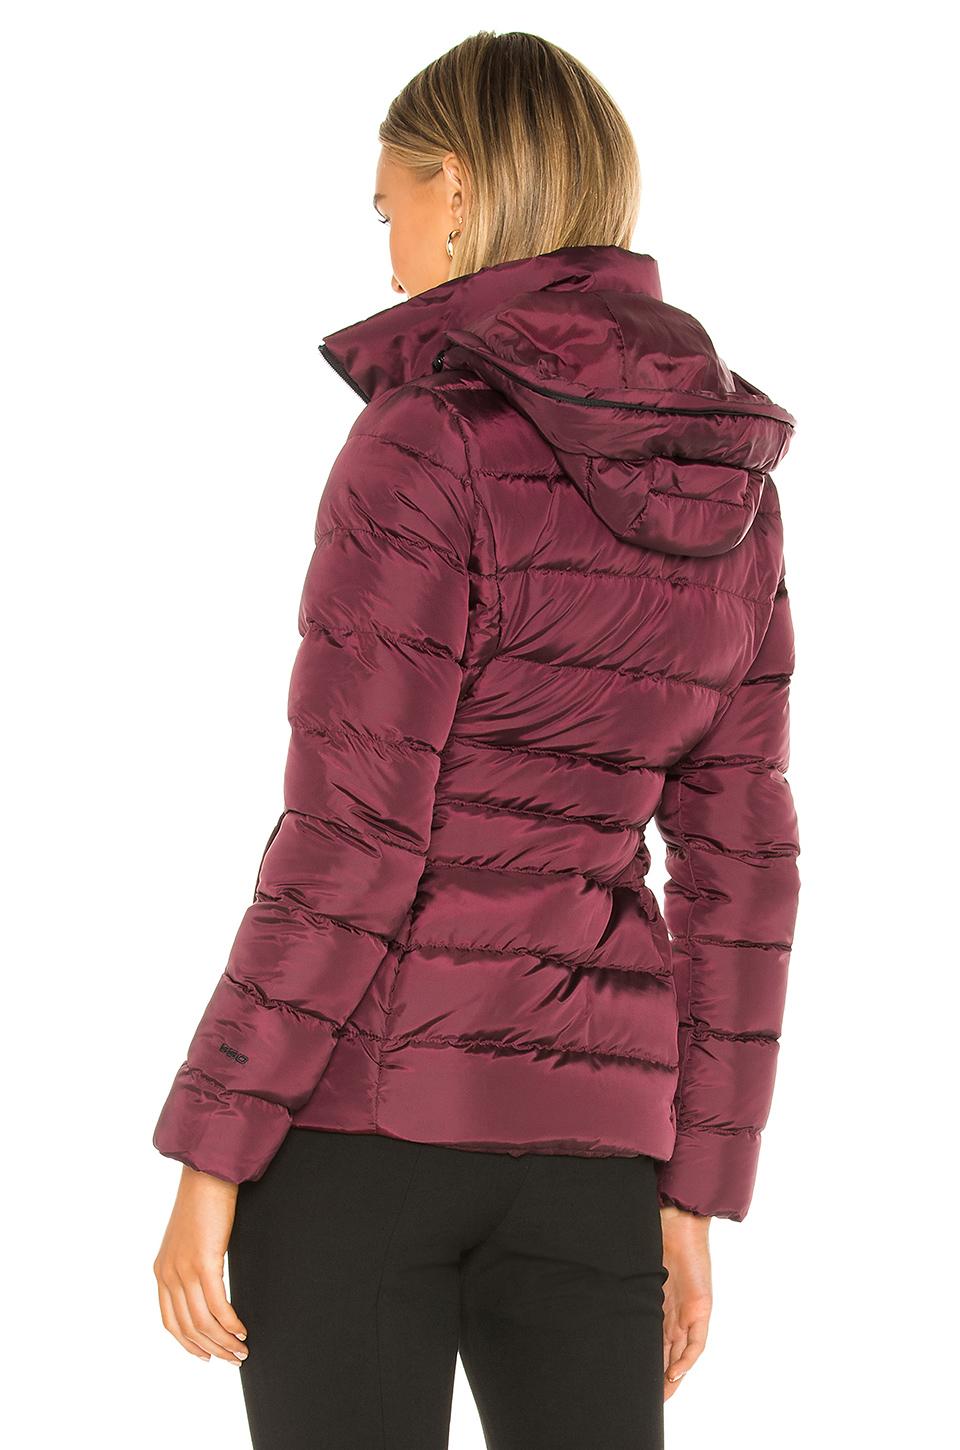 The North Face Gotham Jacket Ii With Faux Fur Trim in Red - Lyst